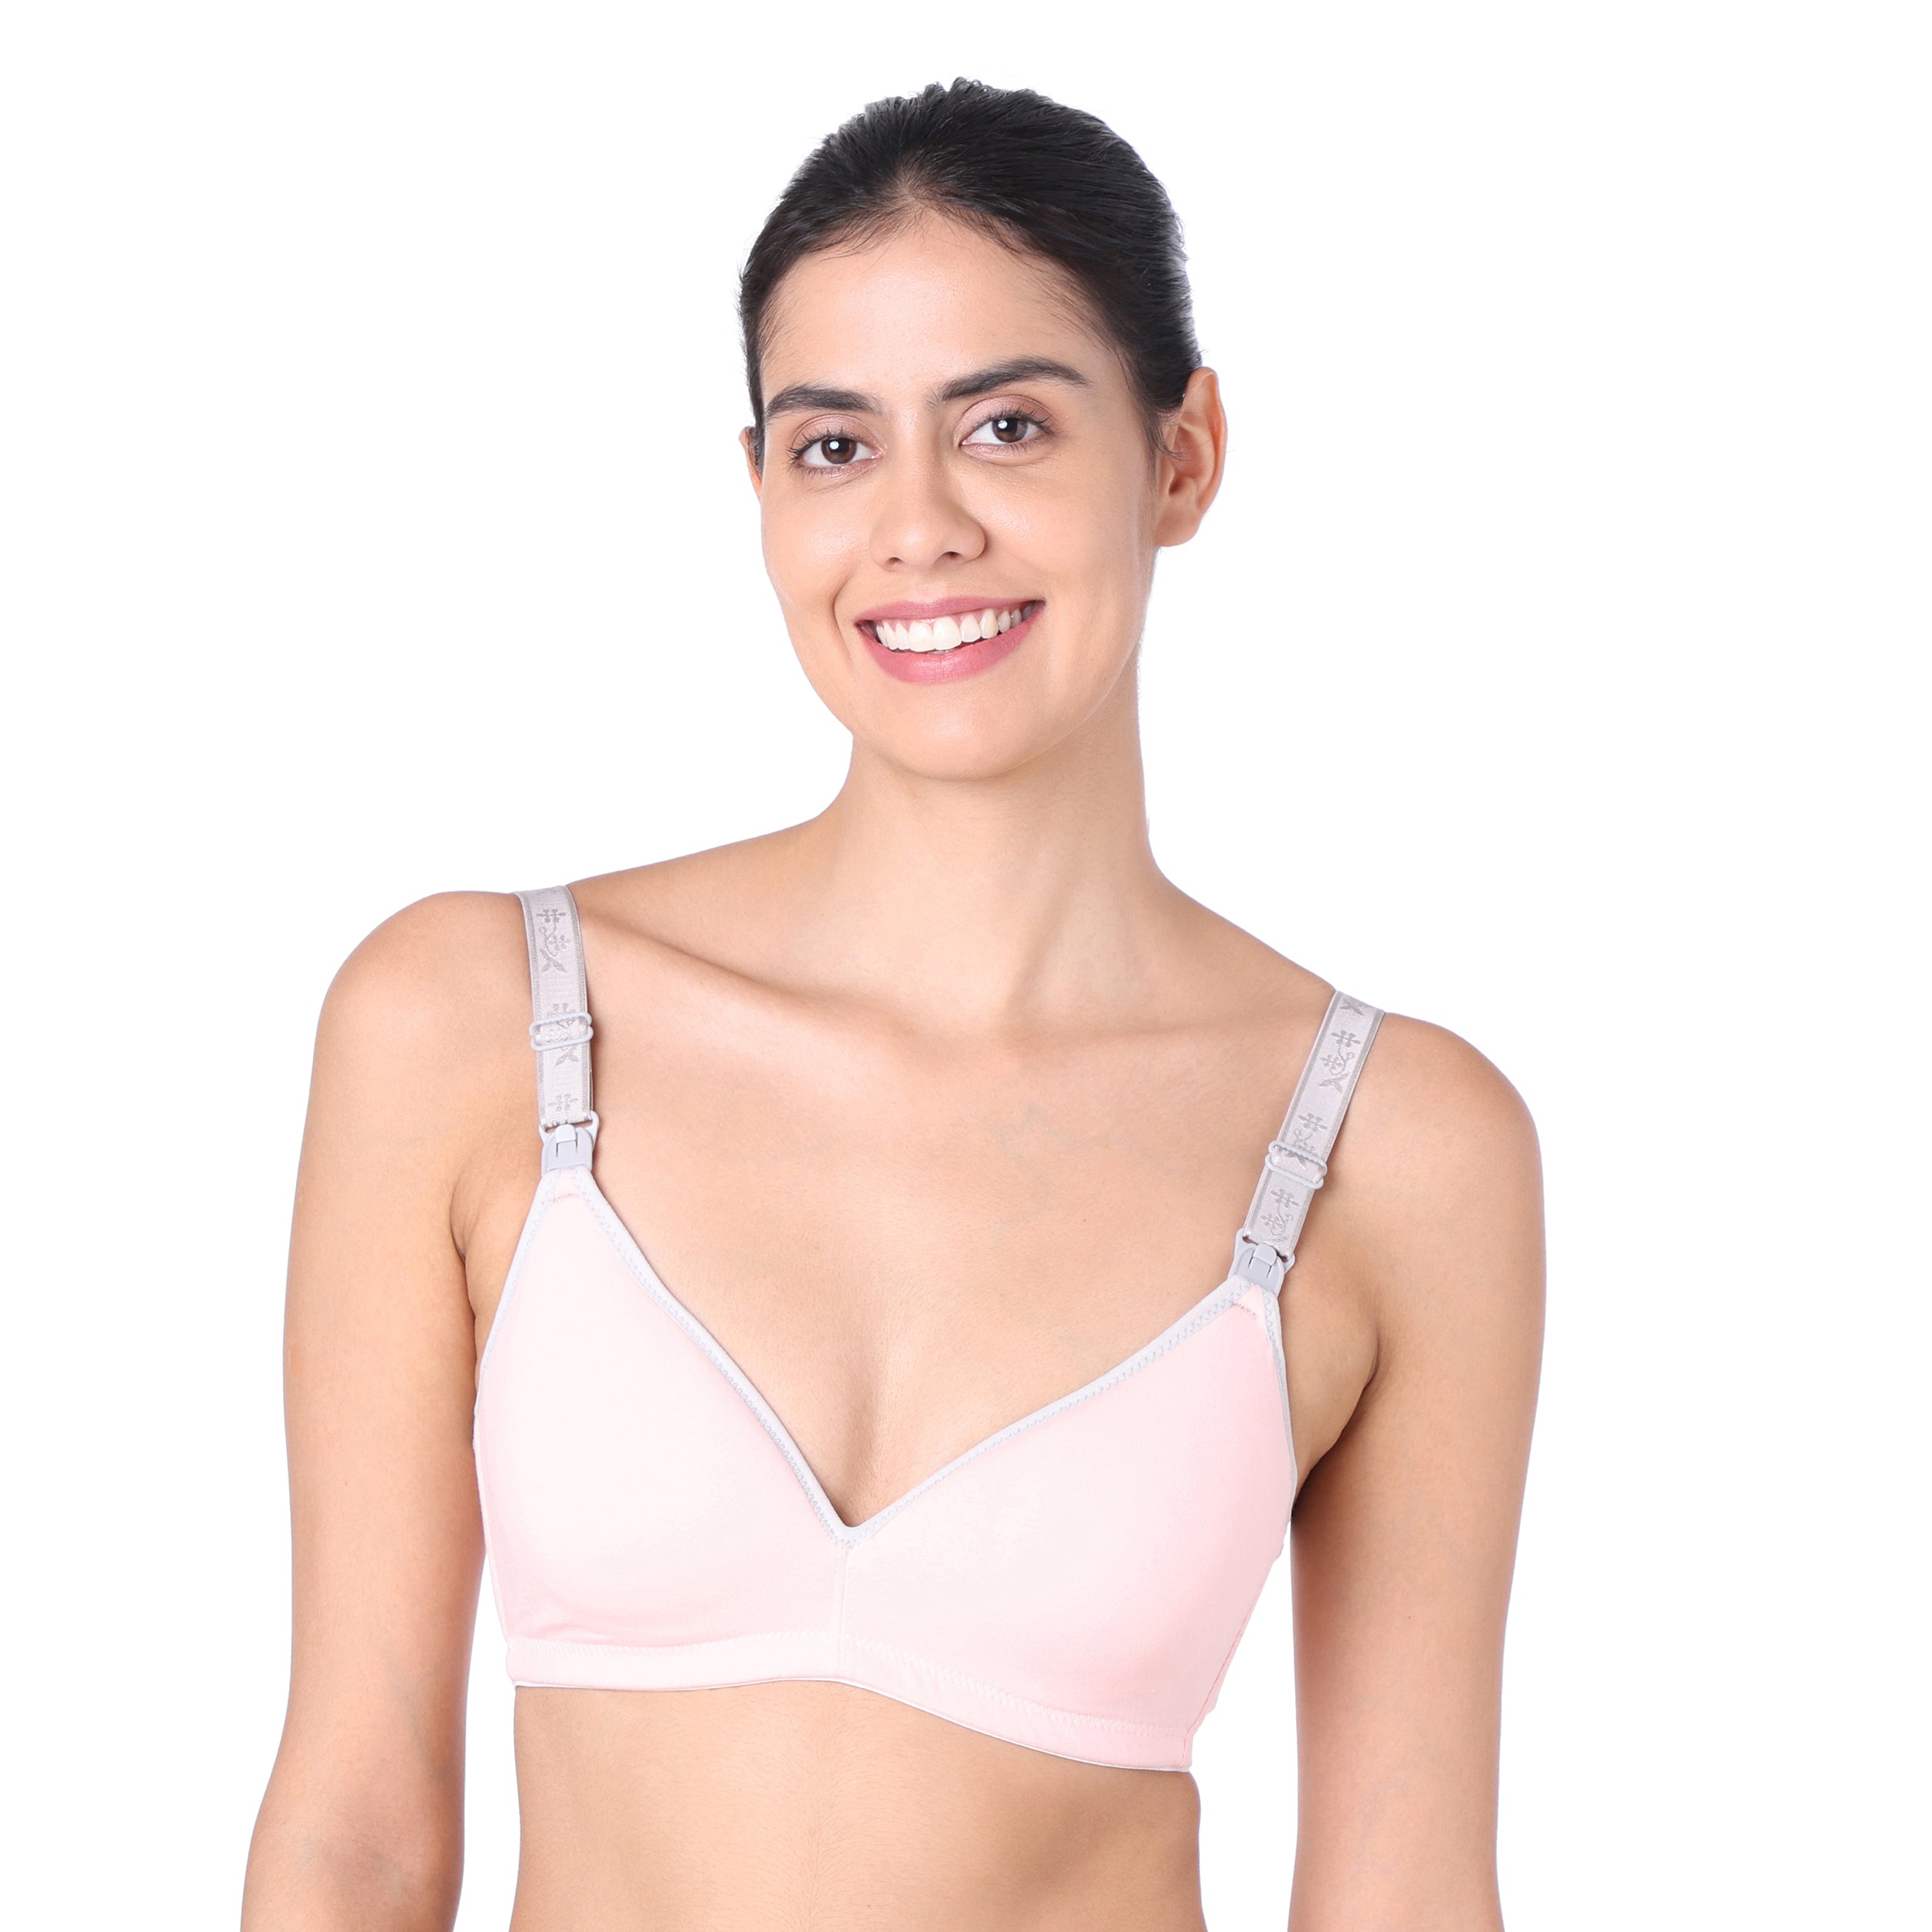 Buy Pink Lingerie Sets for Women by In-curve Online